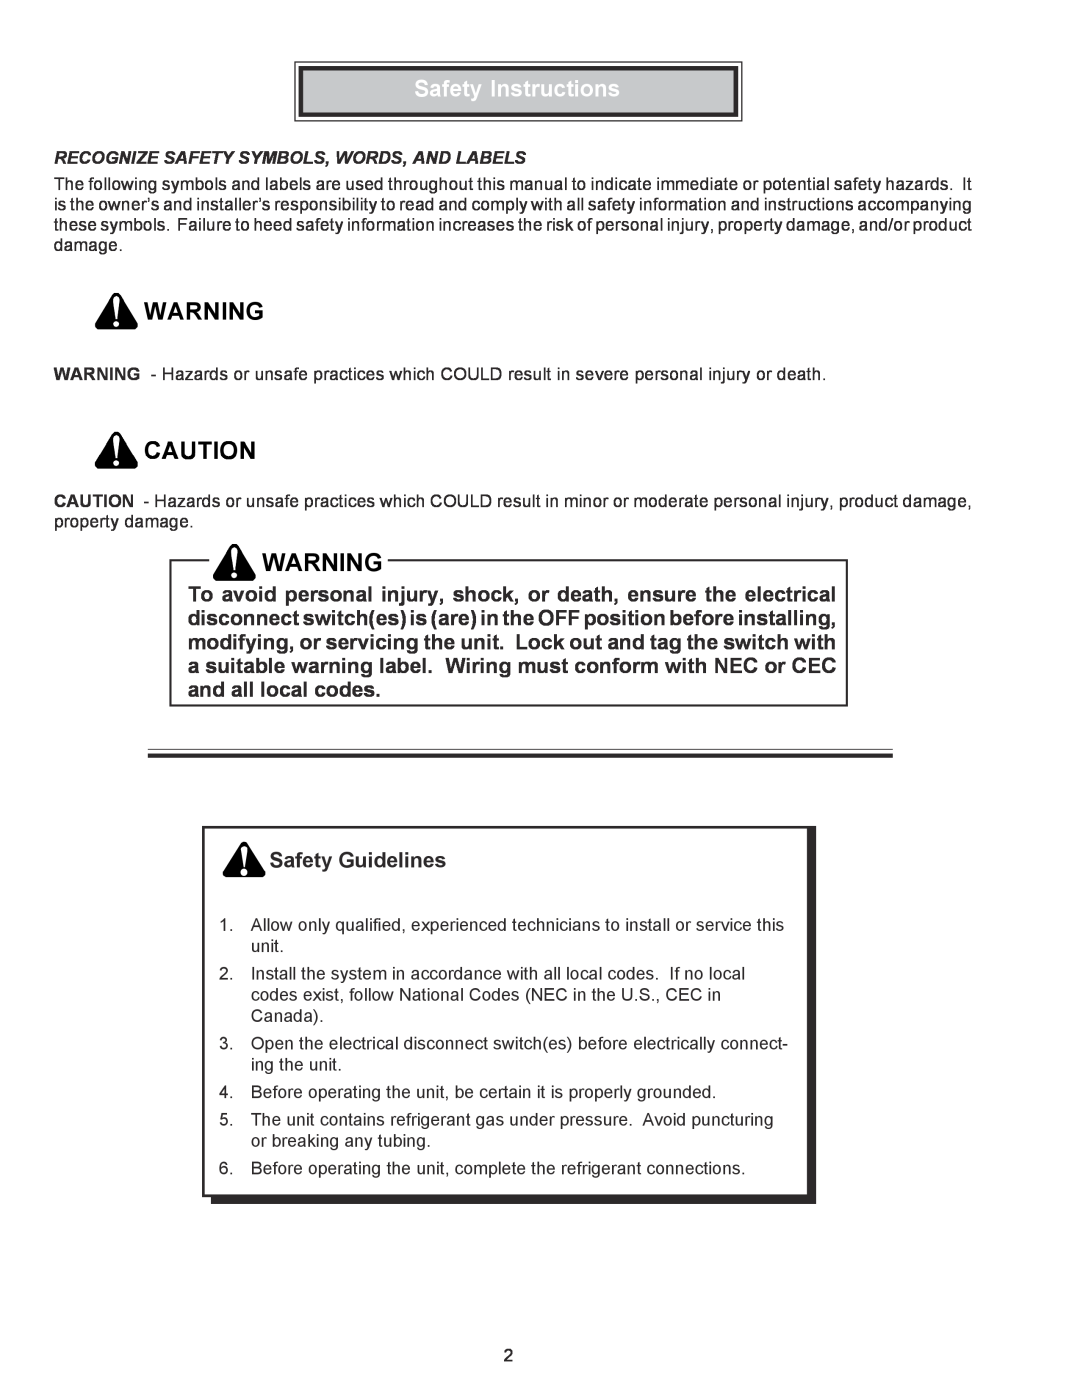 Goodman Mfg RHA**B*D Safety Instructions, Safety Guidelines, Recognize Safety Symbols, Words, And Labels 